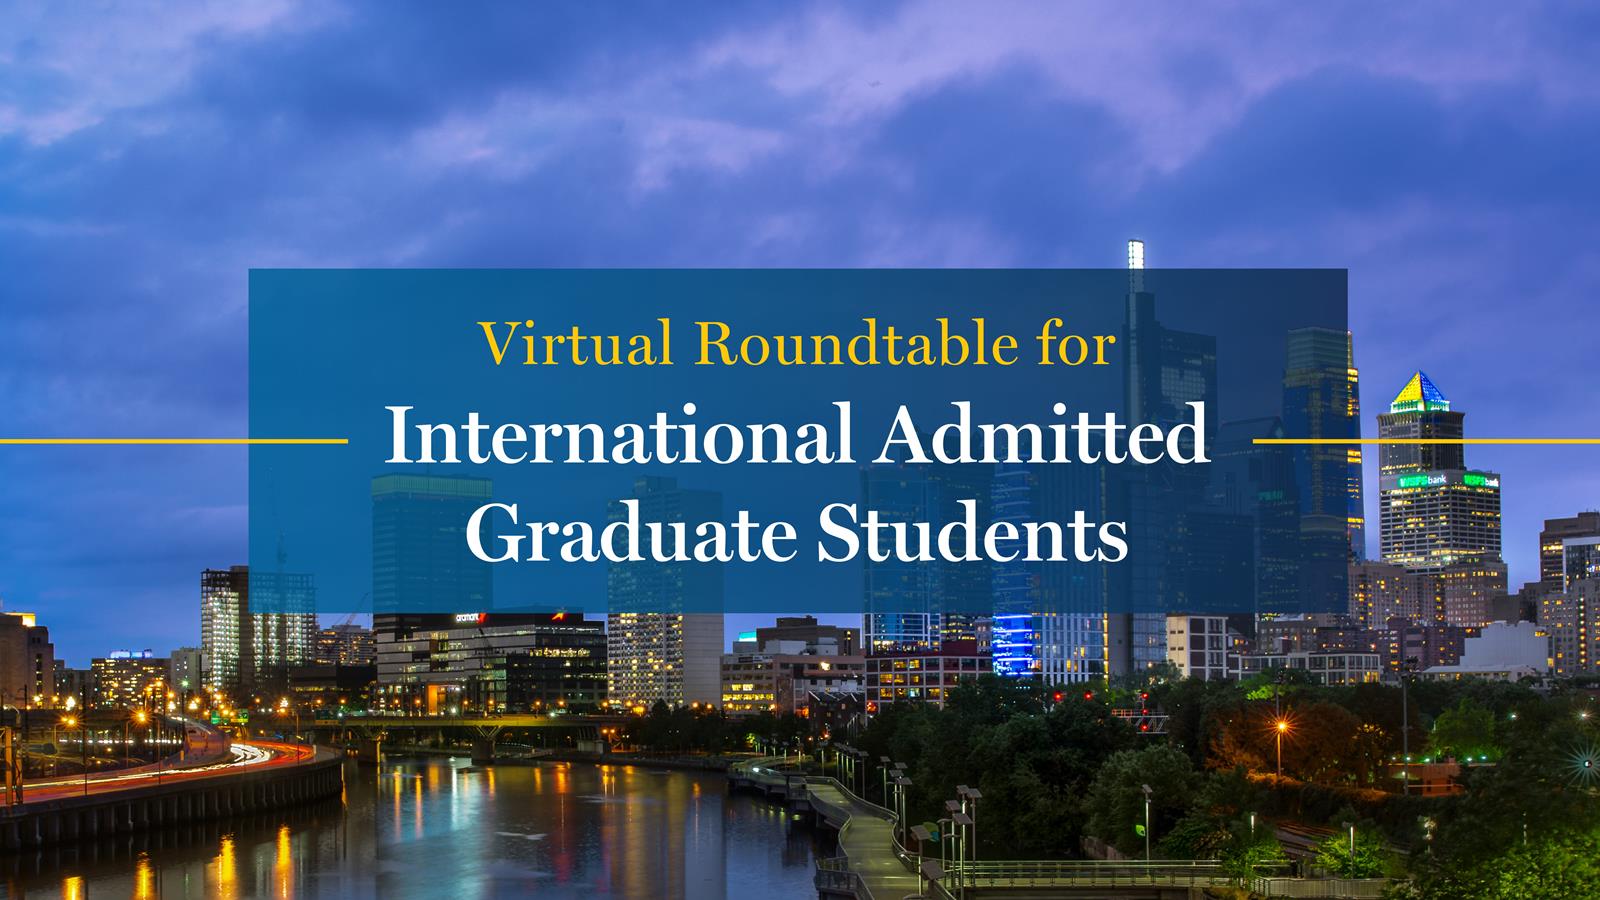 Virtual Roundtable for International Admitted Graduate Students